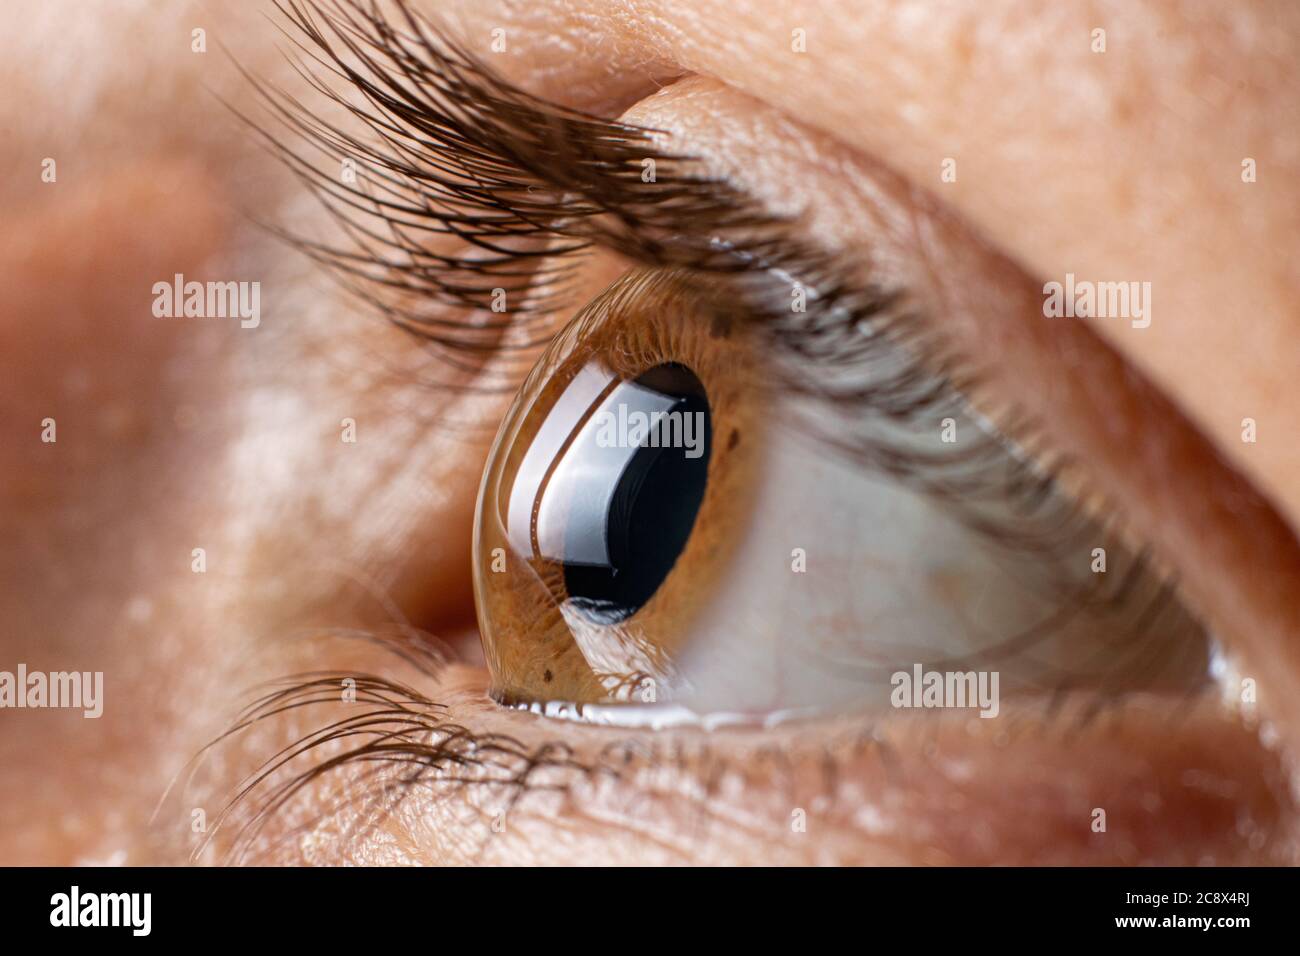 Keratoconus of eye, 3th degree. Contortion of the cornea in the form of a cone, deterioration of vision, astigmatism. Macro close up. Stock Photo